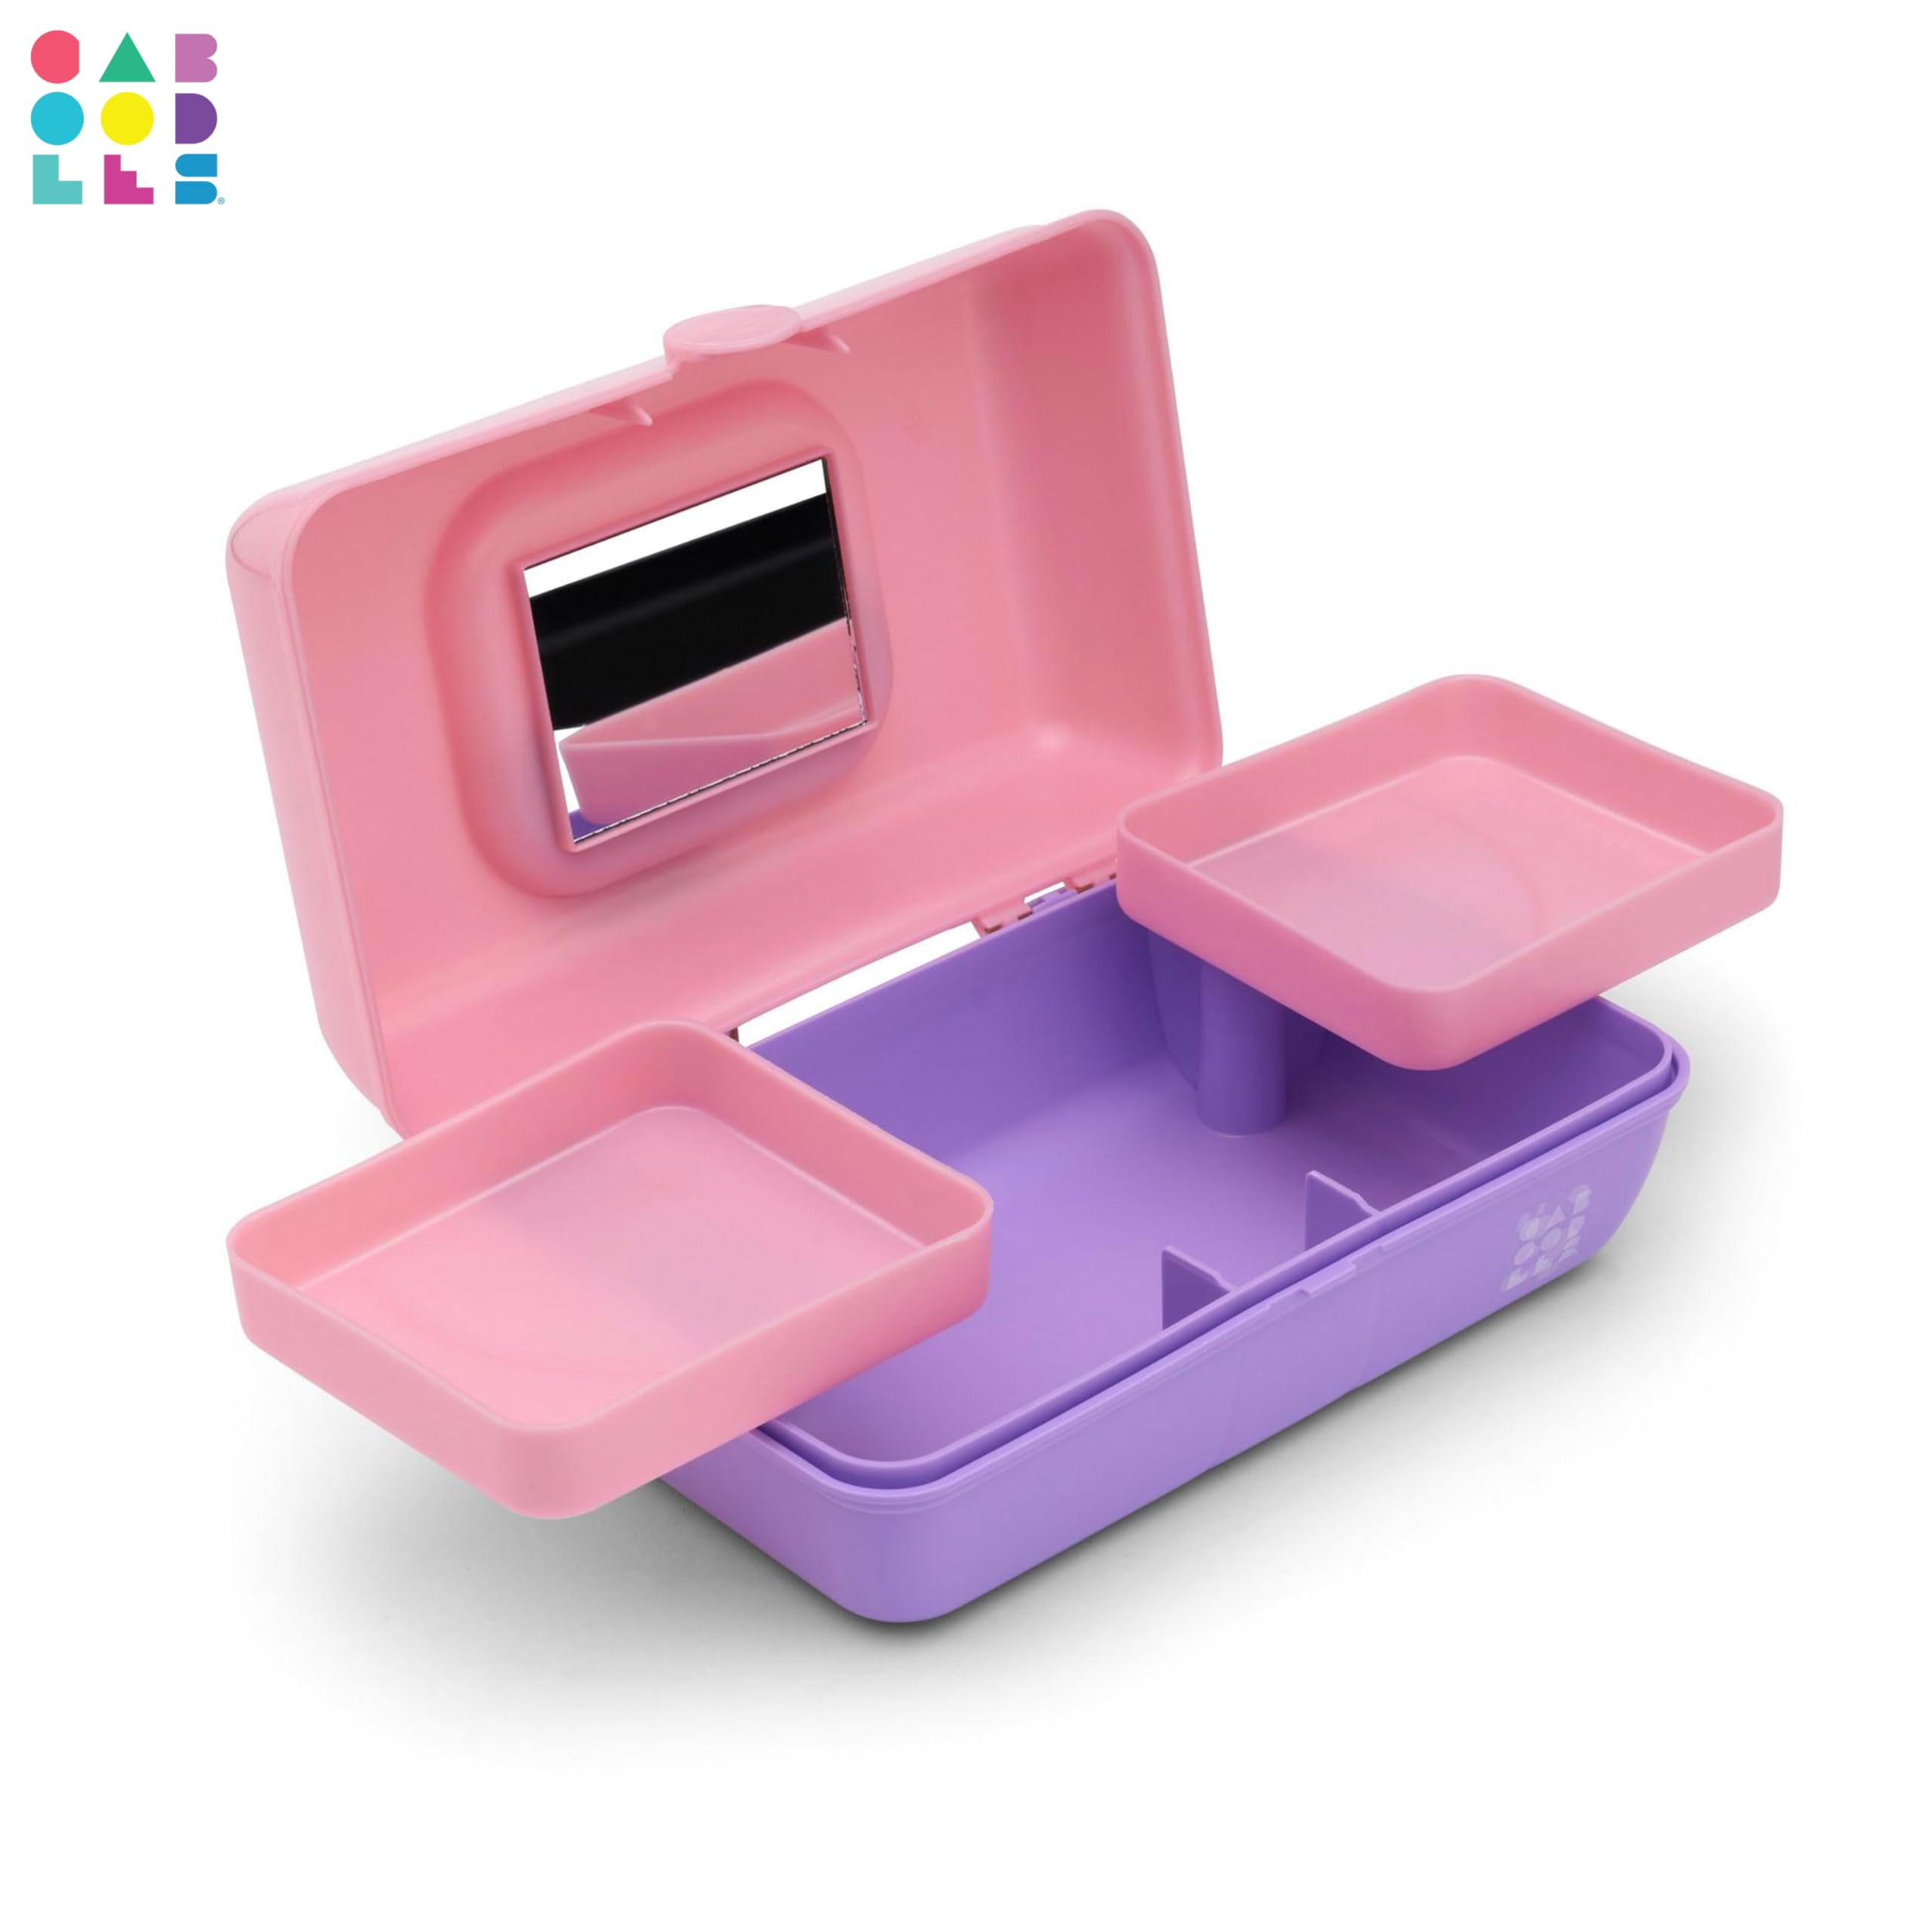 Caboodles Pretty in Petite Makeup Box, Two-Tone Pink on Lavender, Hard Plastic Organizer Box, 2 Swivel Trays, Fashion Mirror, Secure Latch for Safe Travel